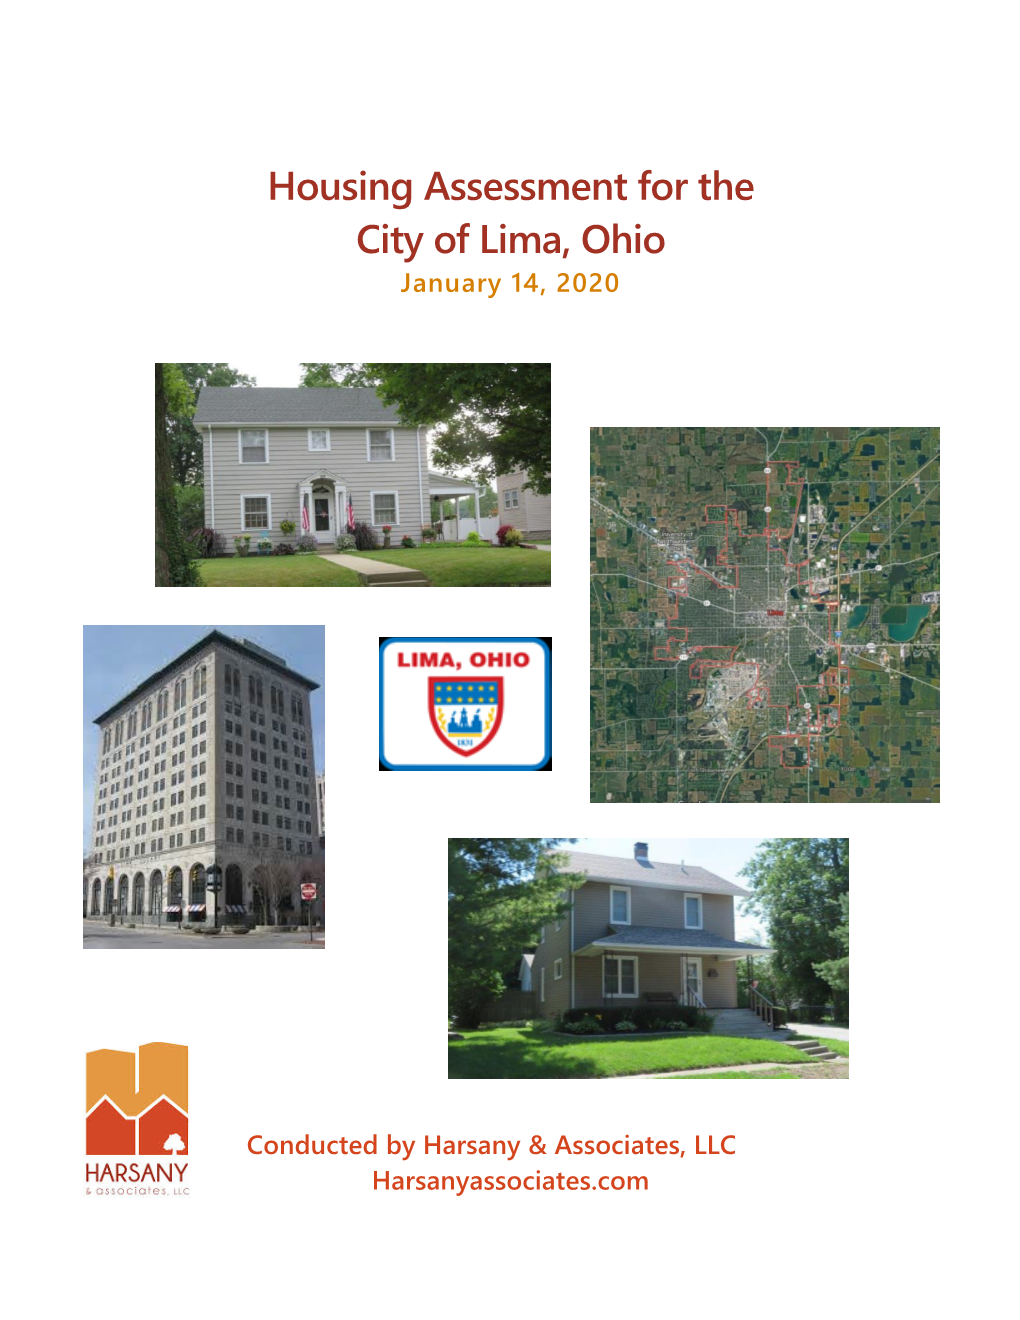 Housing Assessment for the City of Lima, Ohio January 14, 2020